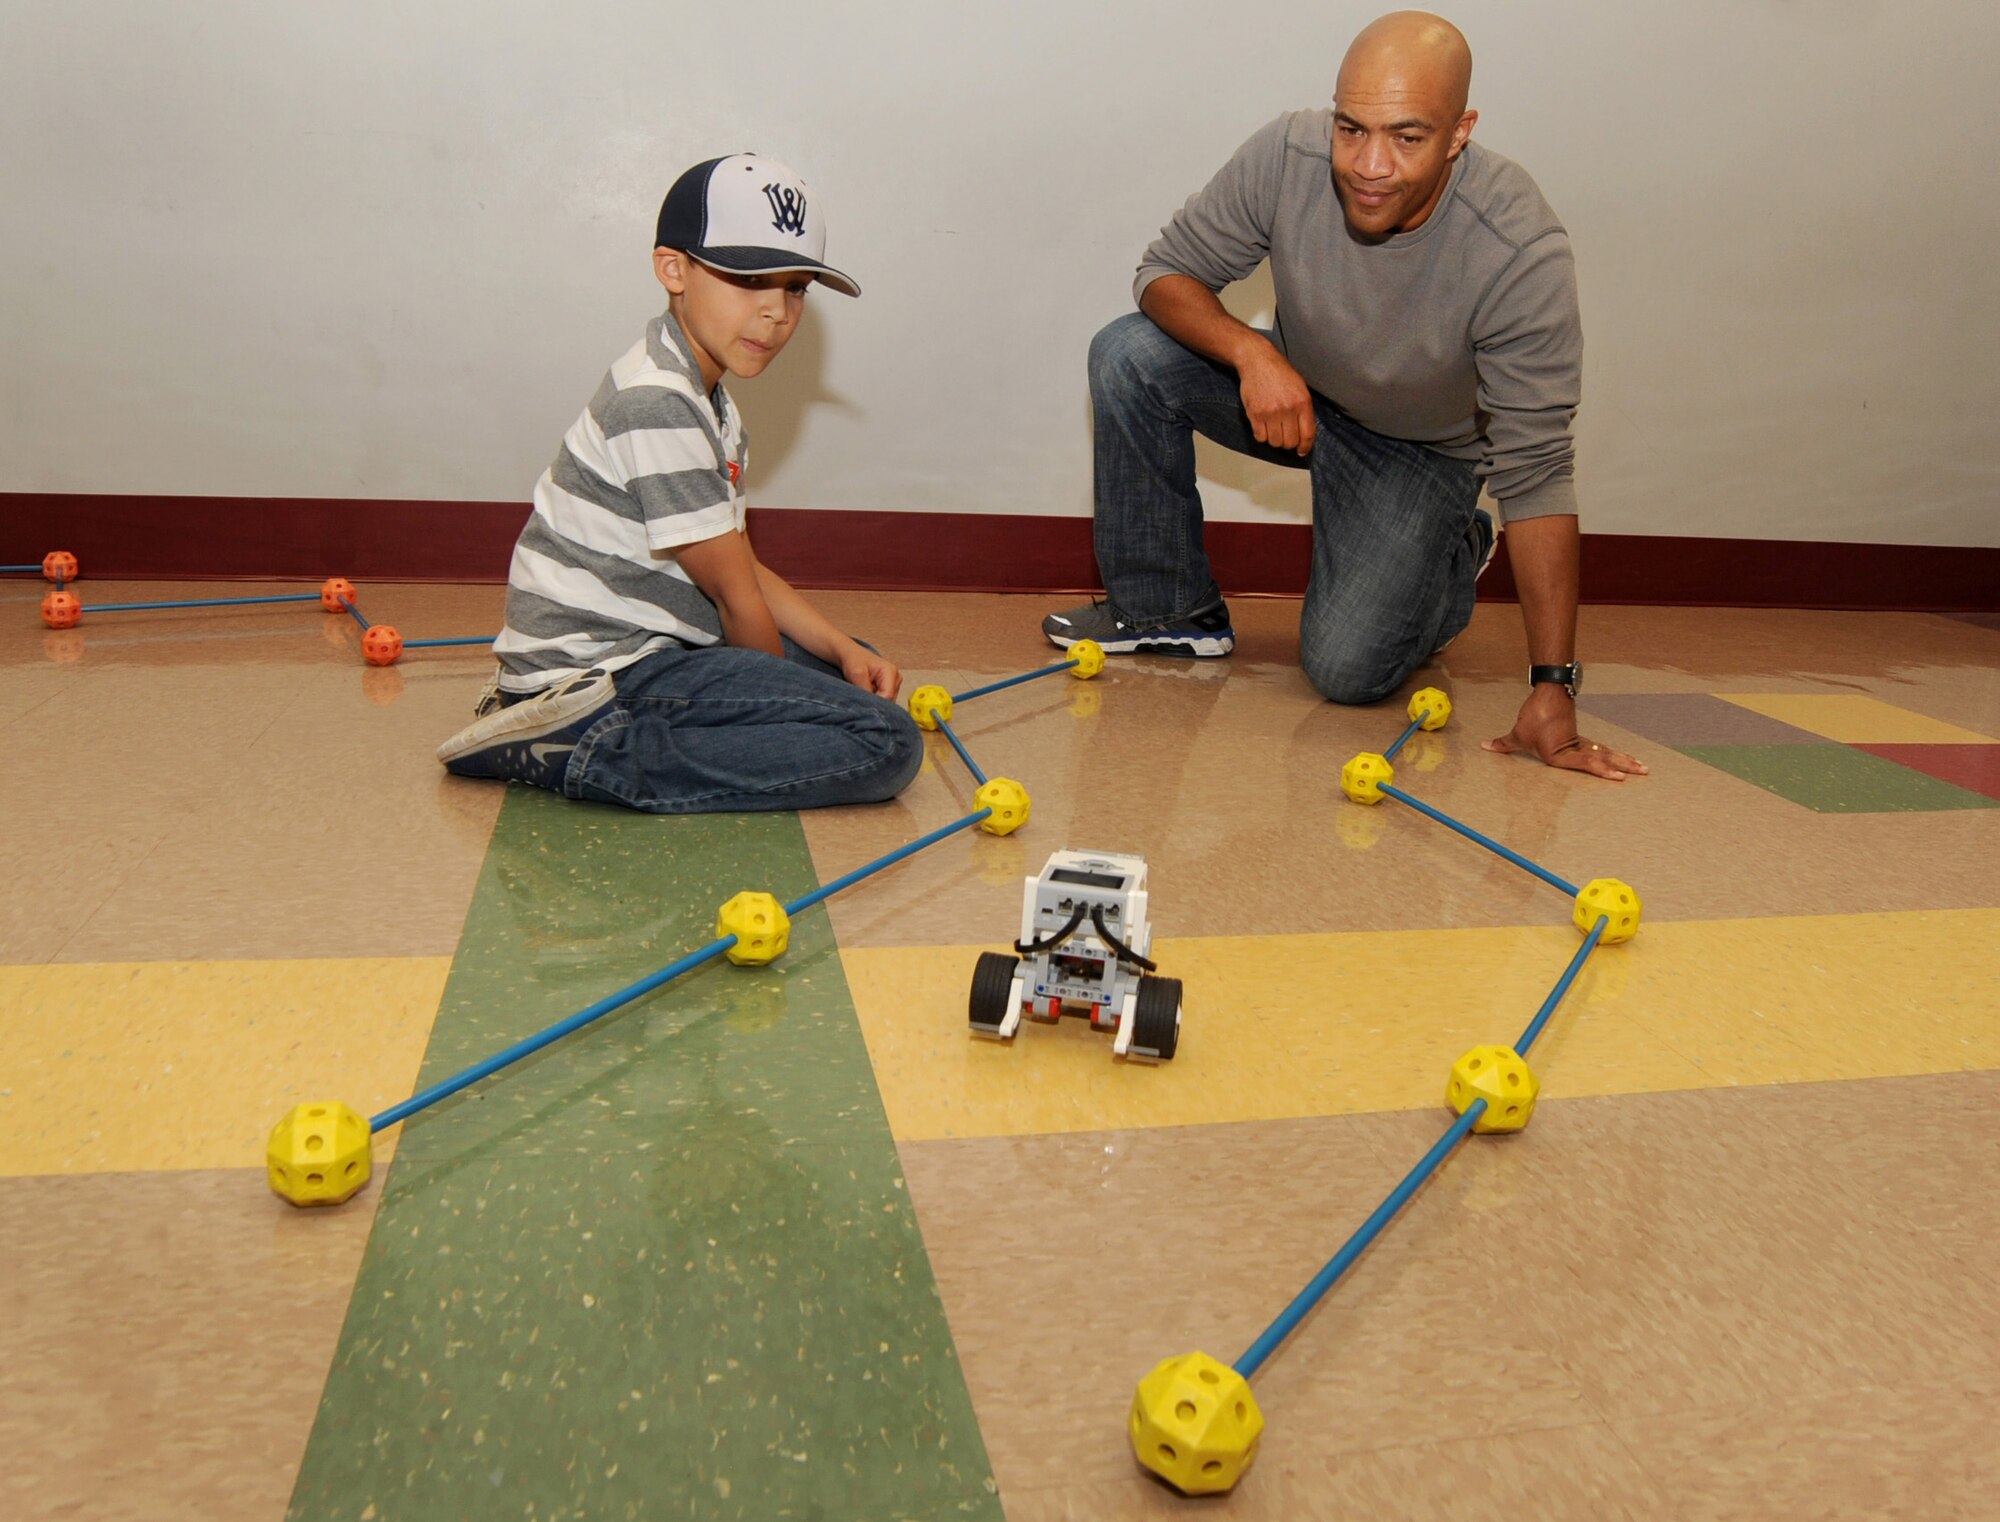 Oregon Air National Guard Senior Airman Brain Zimmerman, assigned to Joint Forces Headquarters, Salem, Ore., helps his son Trent test a robot they have programed at STARBASE, during ‘Kids Day at PANG’, April 25, 2015, Portland Air National Guard Base, Ore. The Oregon National Guard opened the Portland Air Base to children of military members for a special day of activities highlighting “The Month of the Military Child,” designated since 1986 by the Department of Defense as way to recognize the contribution and personal sacrifices children make to the military. (U.S. Air National Guard photo by Tech. Sgt. John Hughel, 142nd Fighter Wing Public Affairs/Released)